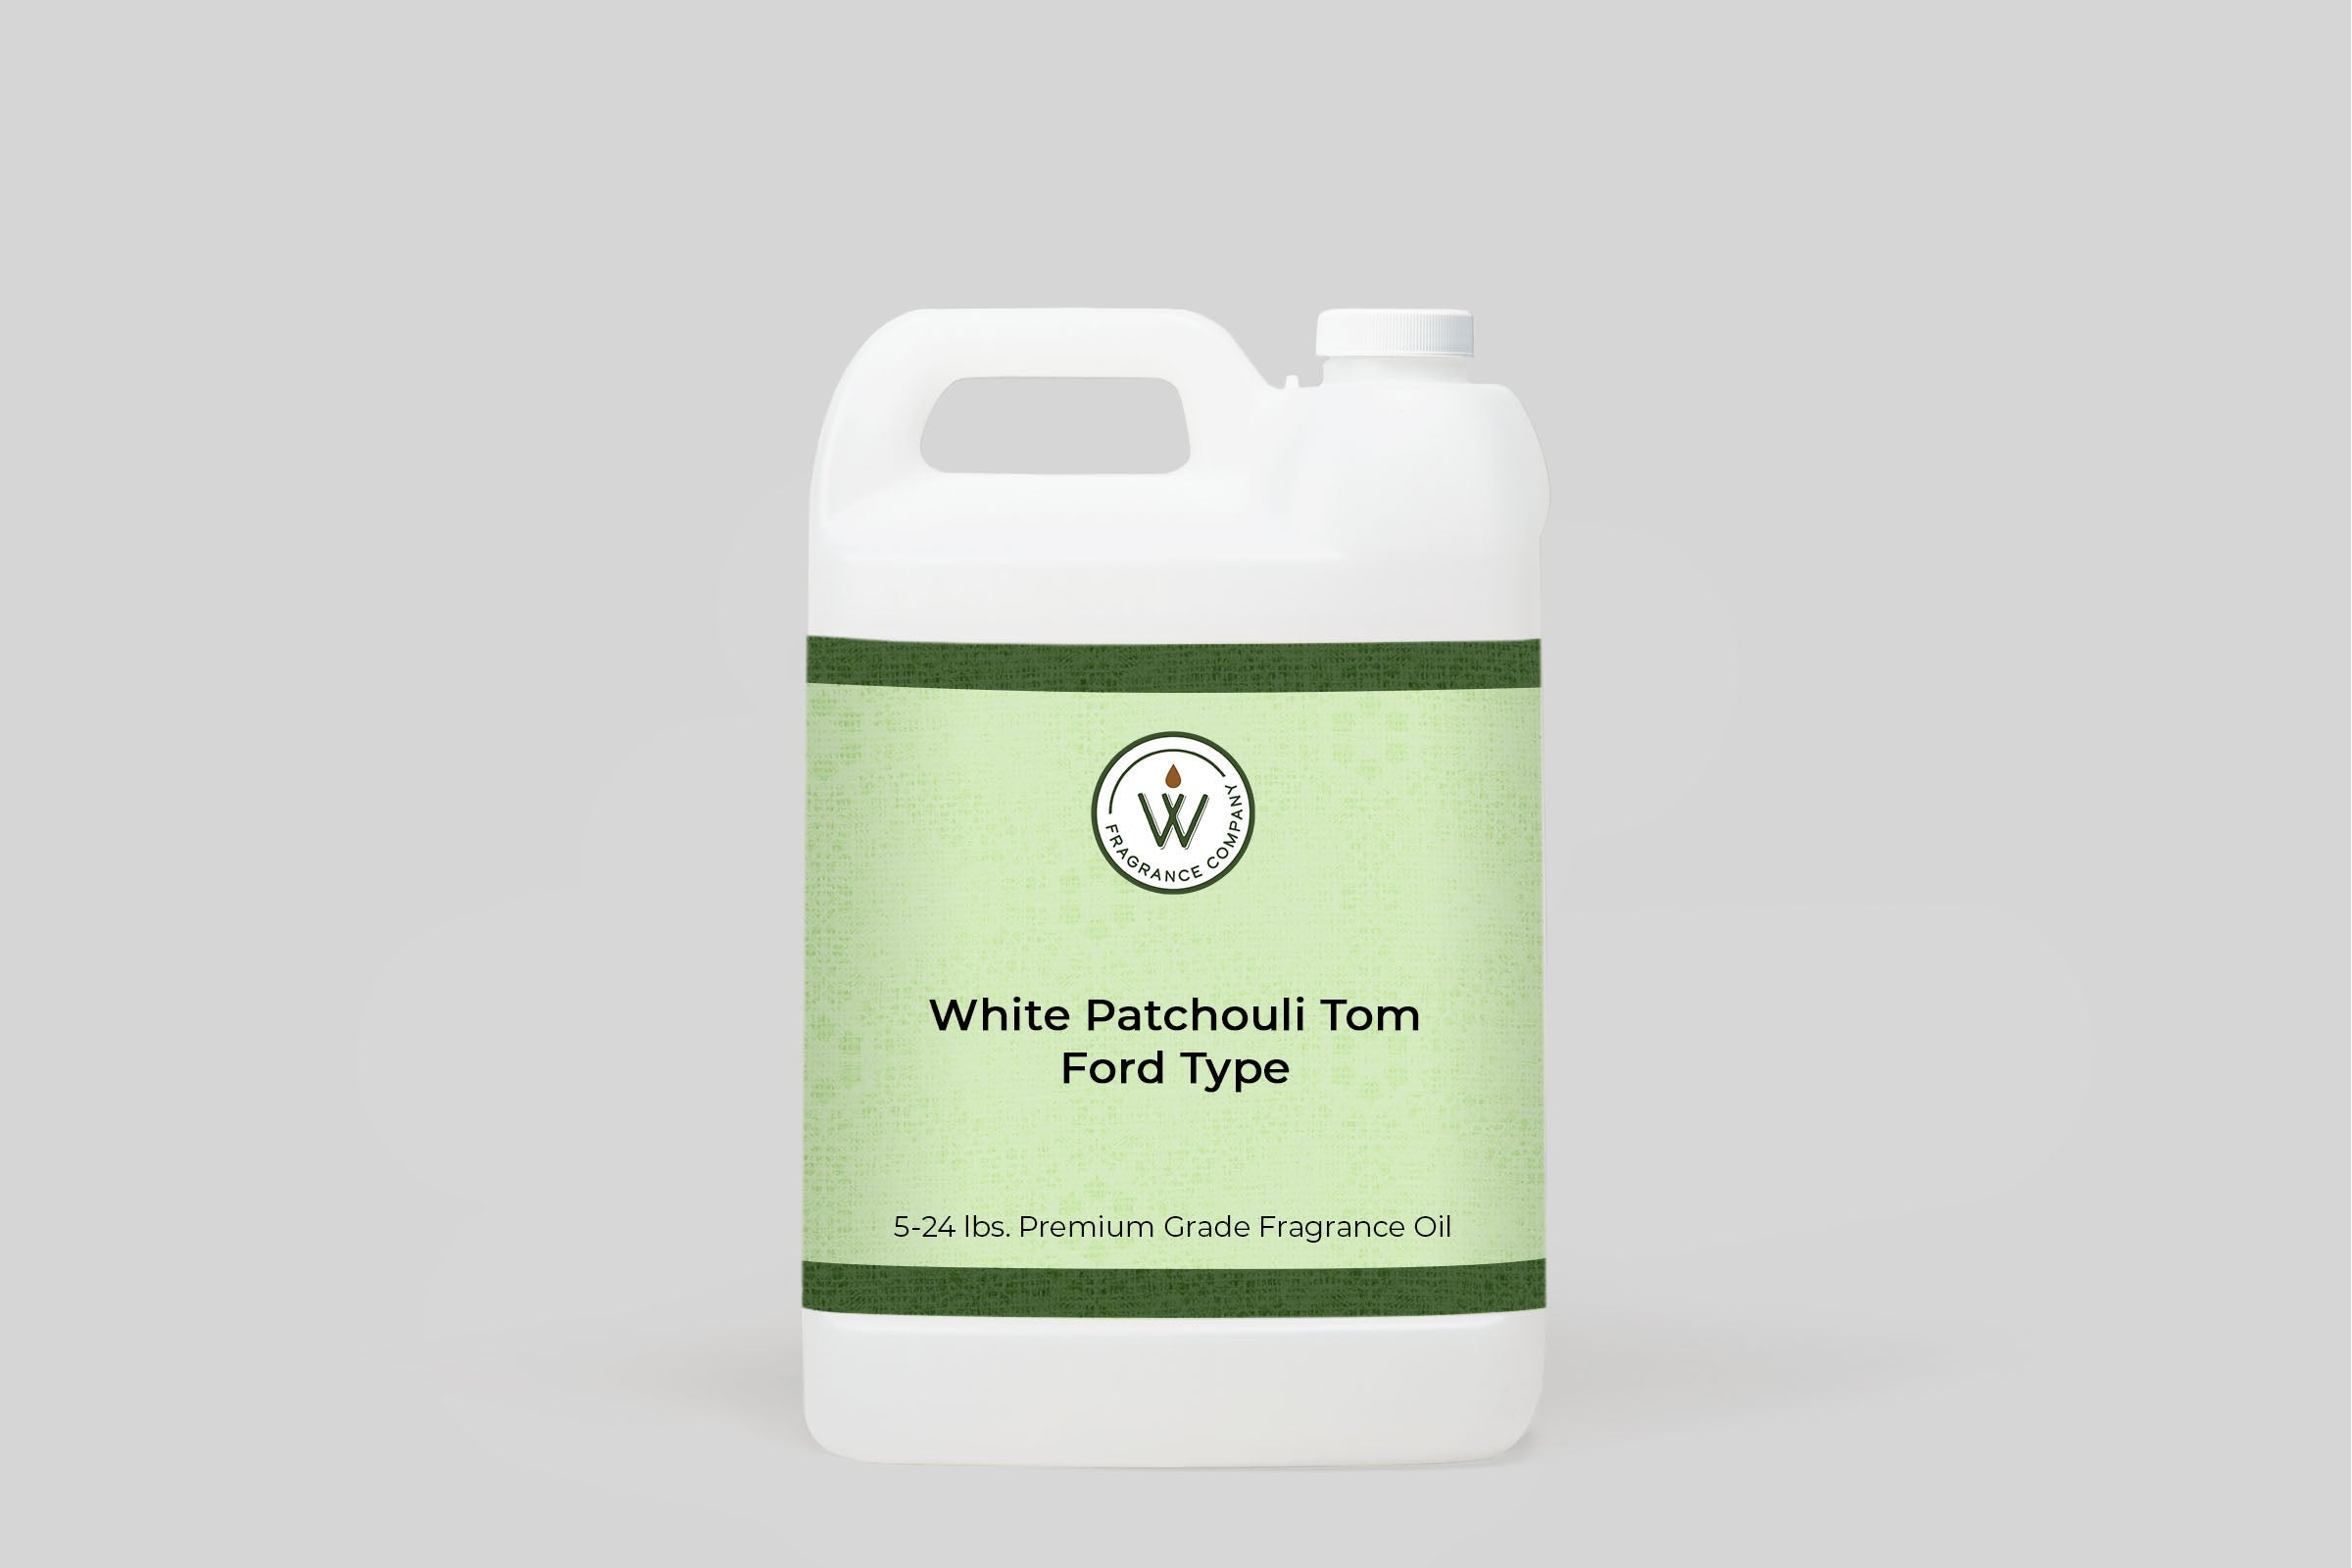 White Patchouli Tom Ford Type Fragrance Oil